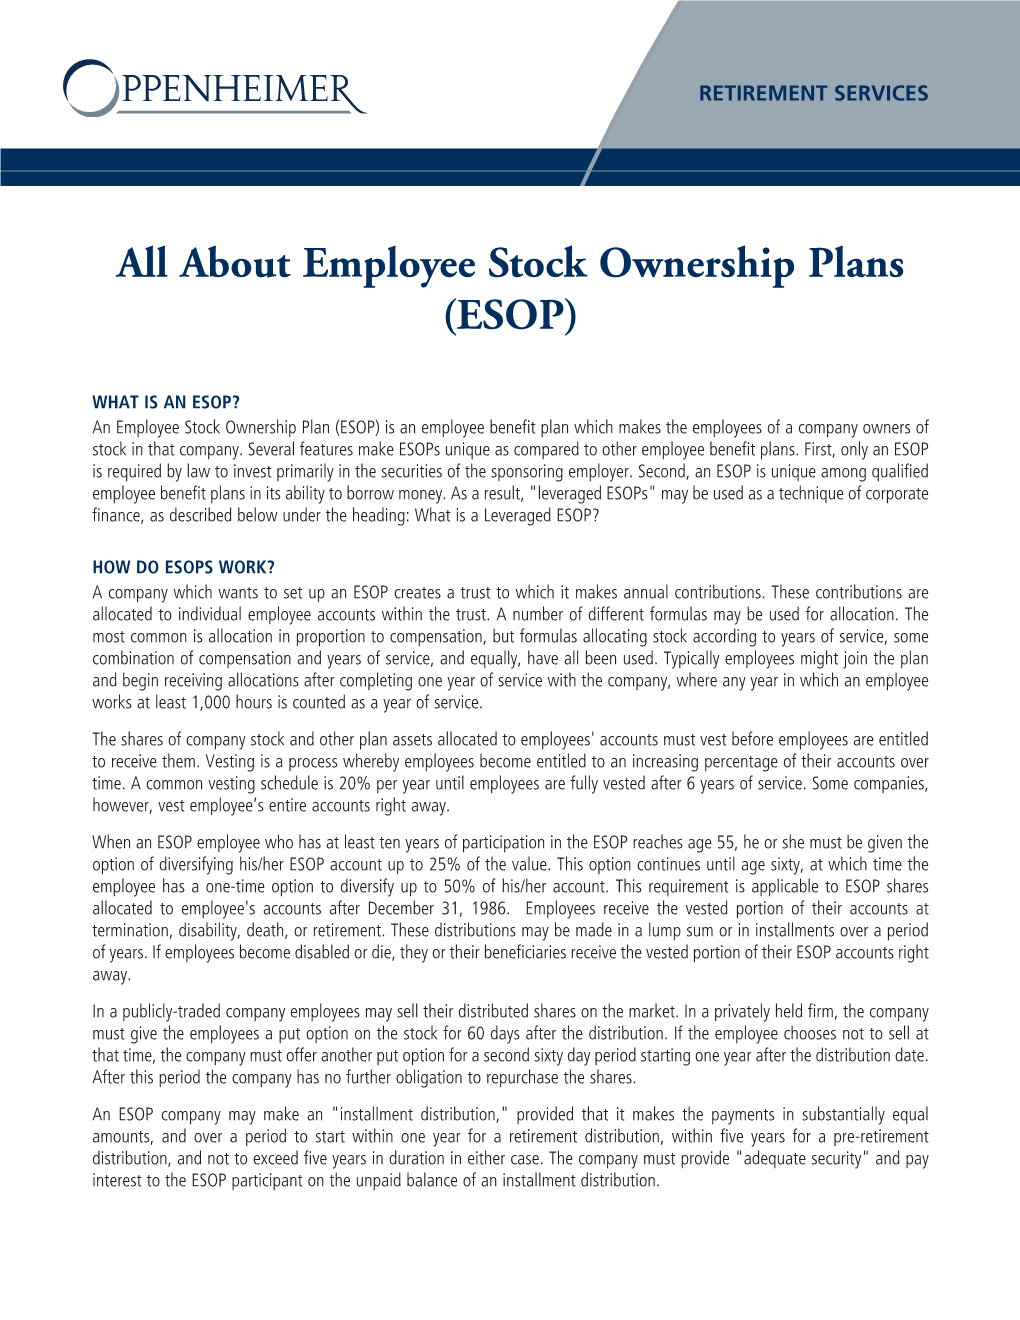 18-RET-47 All About Employee Stock Ownership Plans